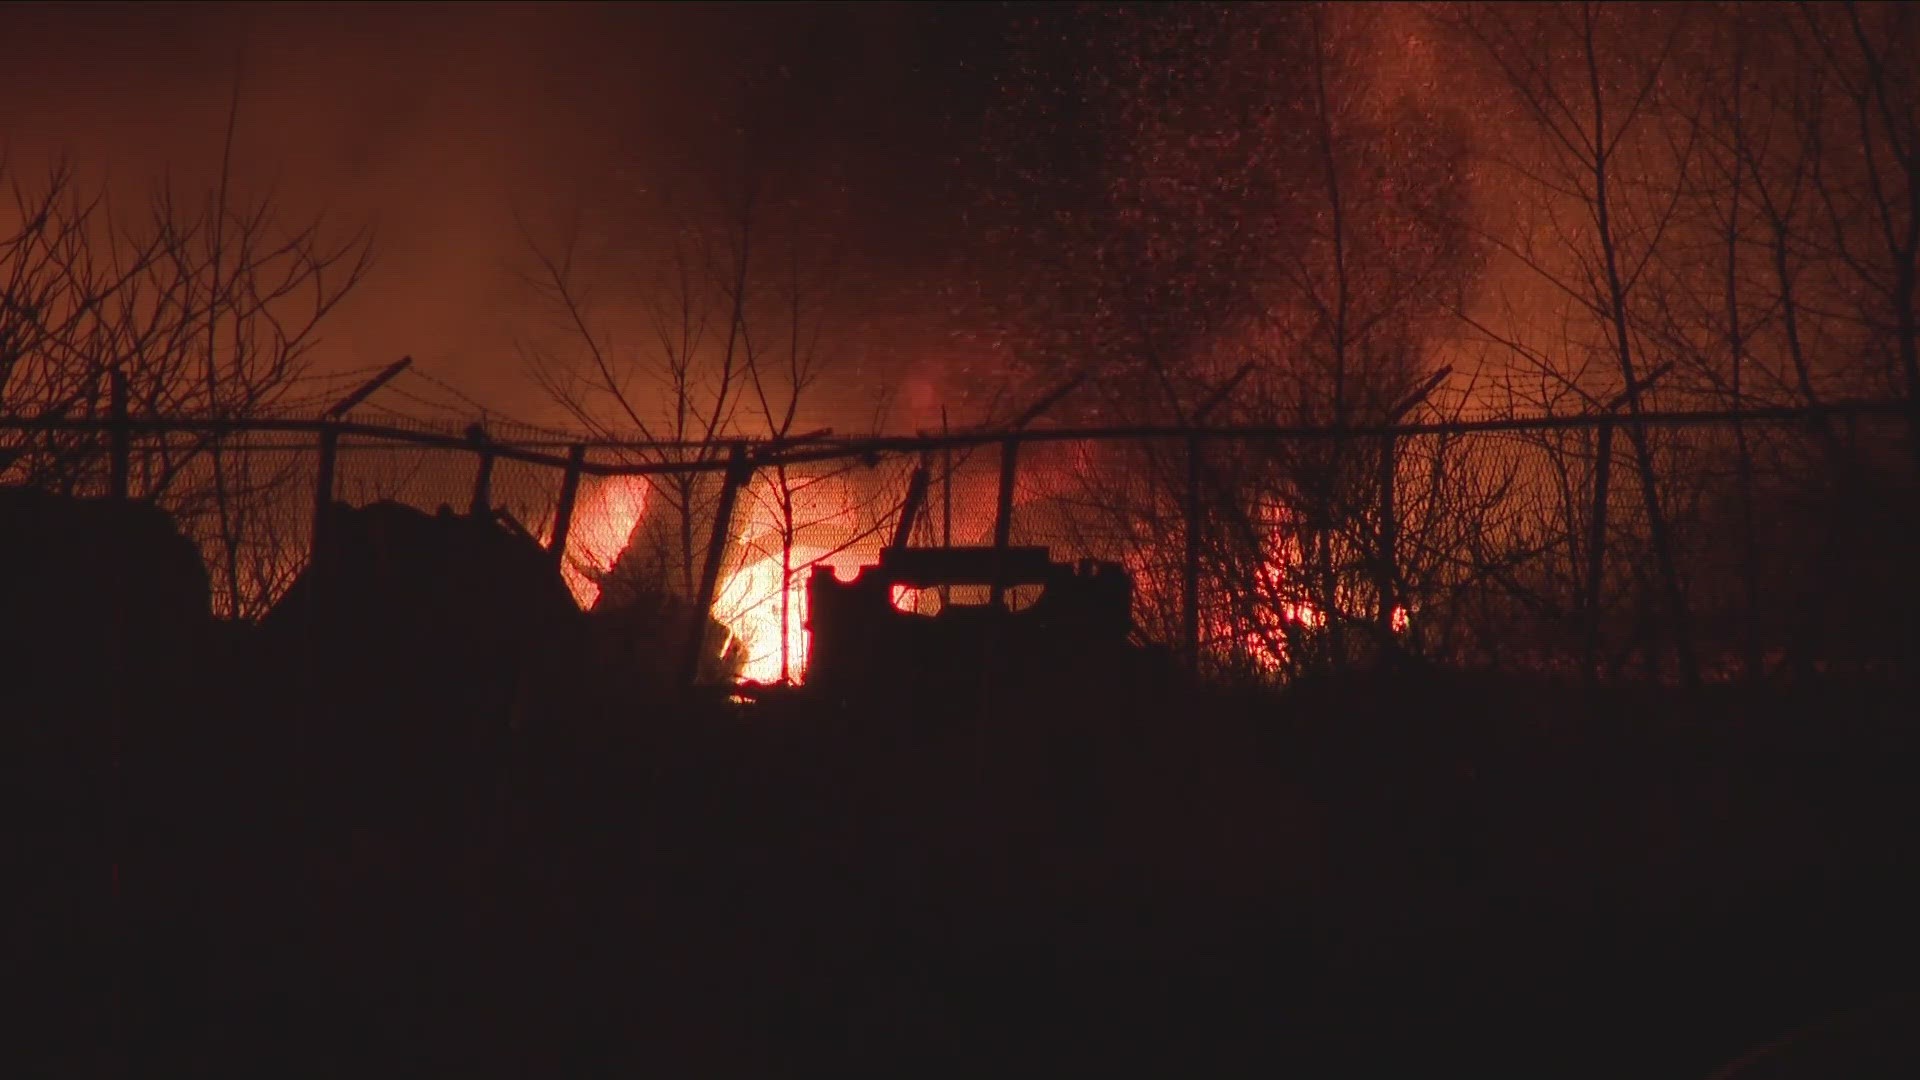 The Buffalo Fire commissioner explained why it took so long to put out the fire.